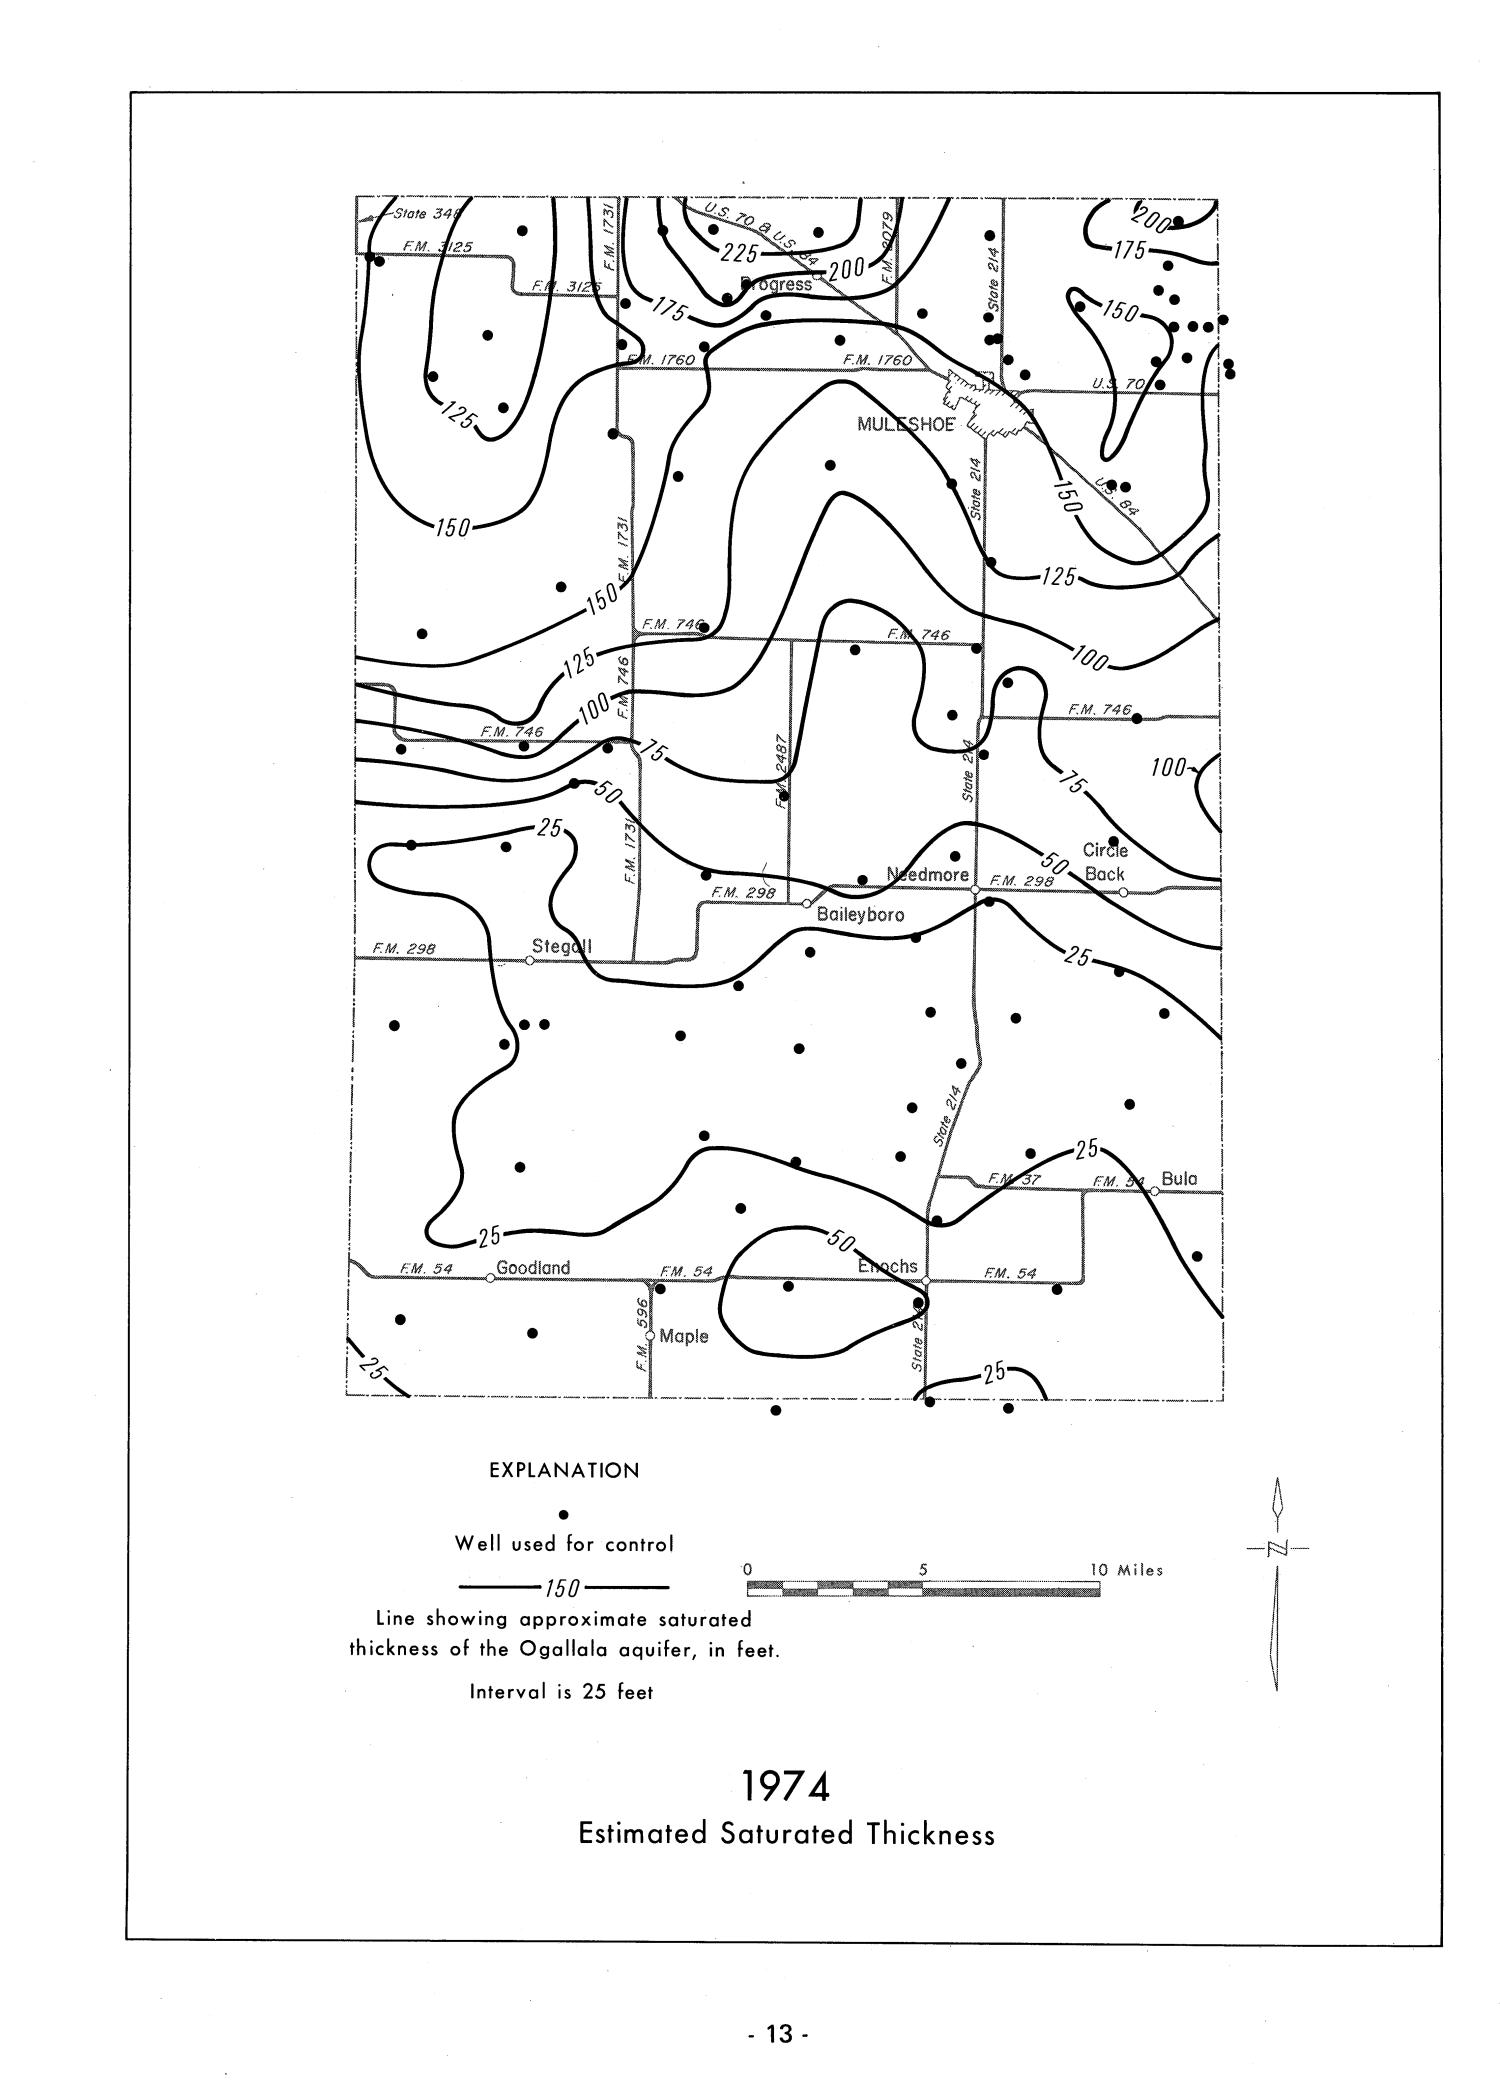 Analytical Study of the Ogallala Aquifer in Bailey County, Texas: Projections of Saturated Thickness, Volume of Water in Storage, Pumpage Rates, Pumping Lifts, and Well Yields
                                                
                                                    13
                                                